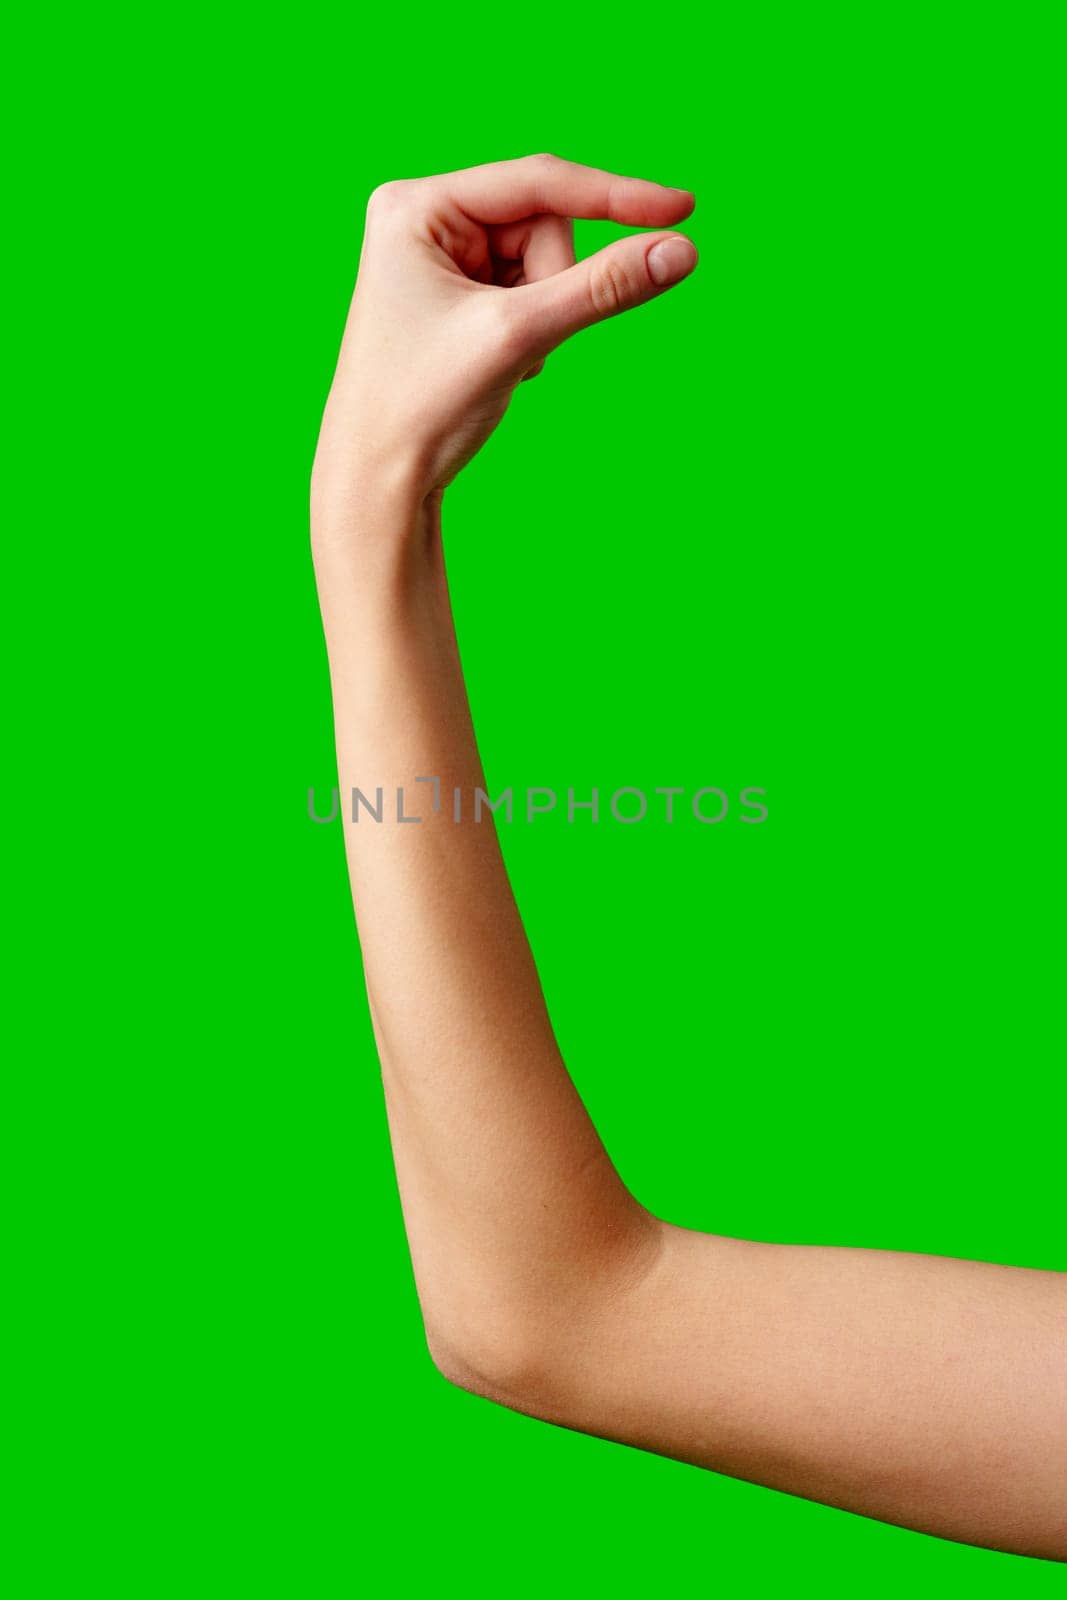 Womans Hand Reaching Up Into the Air